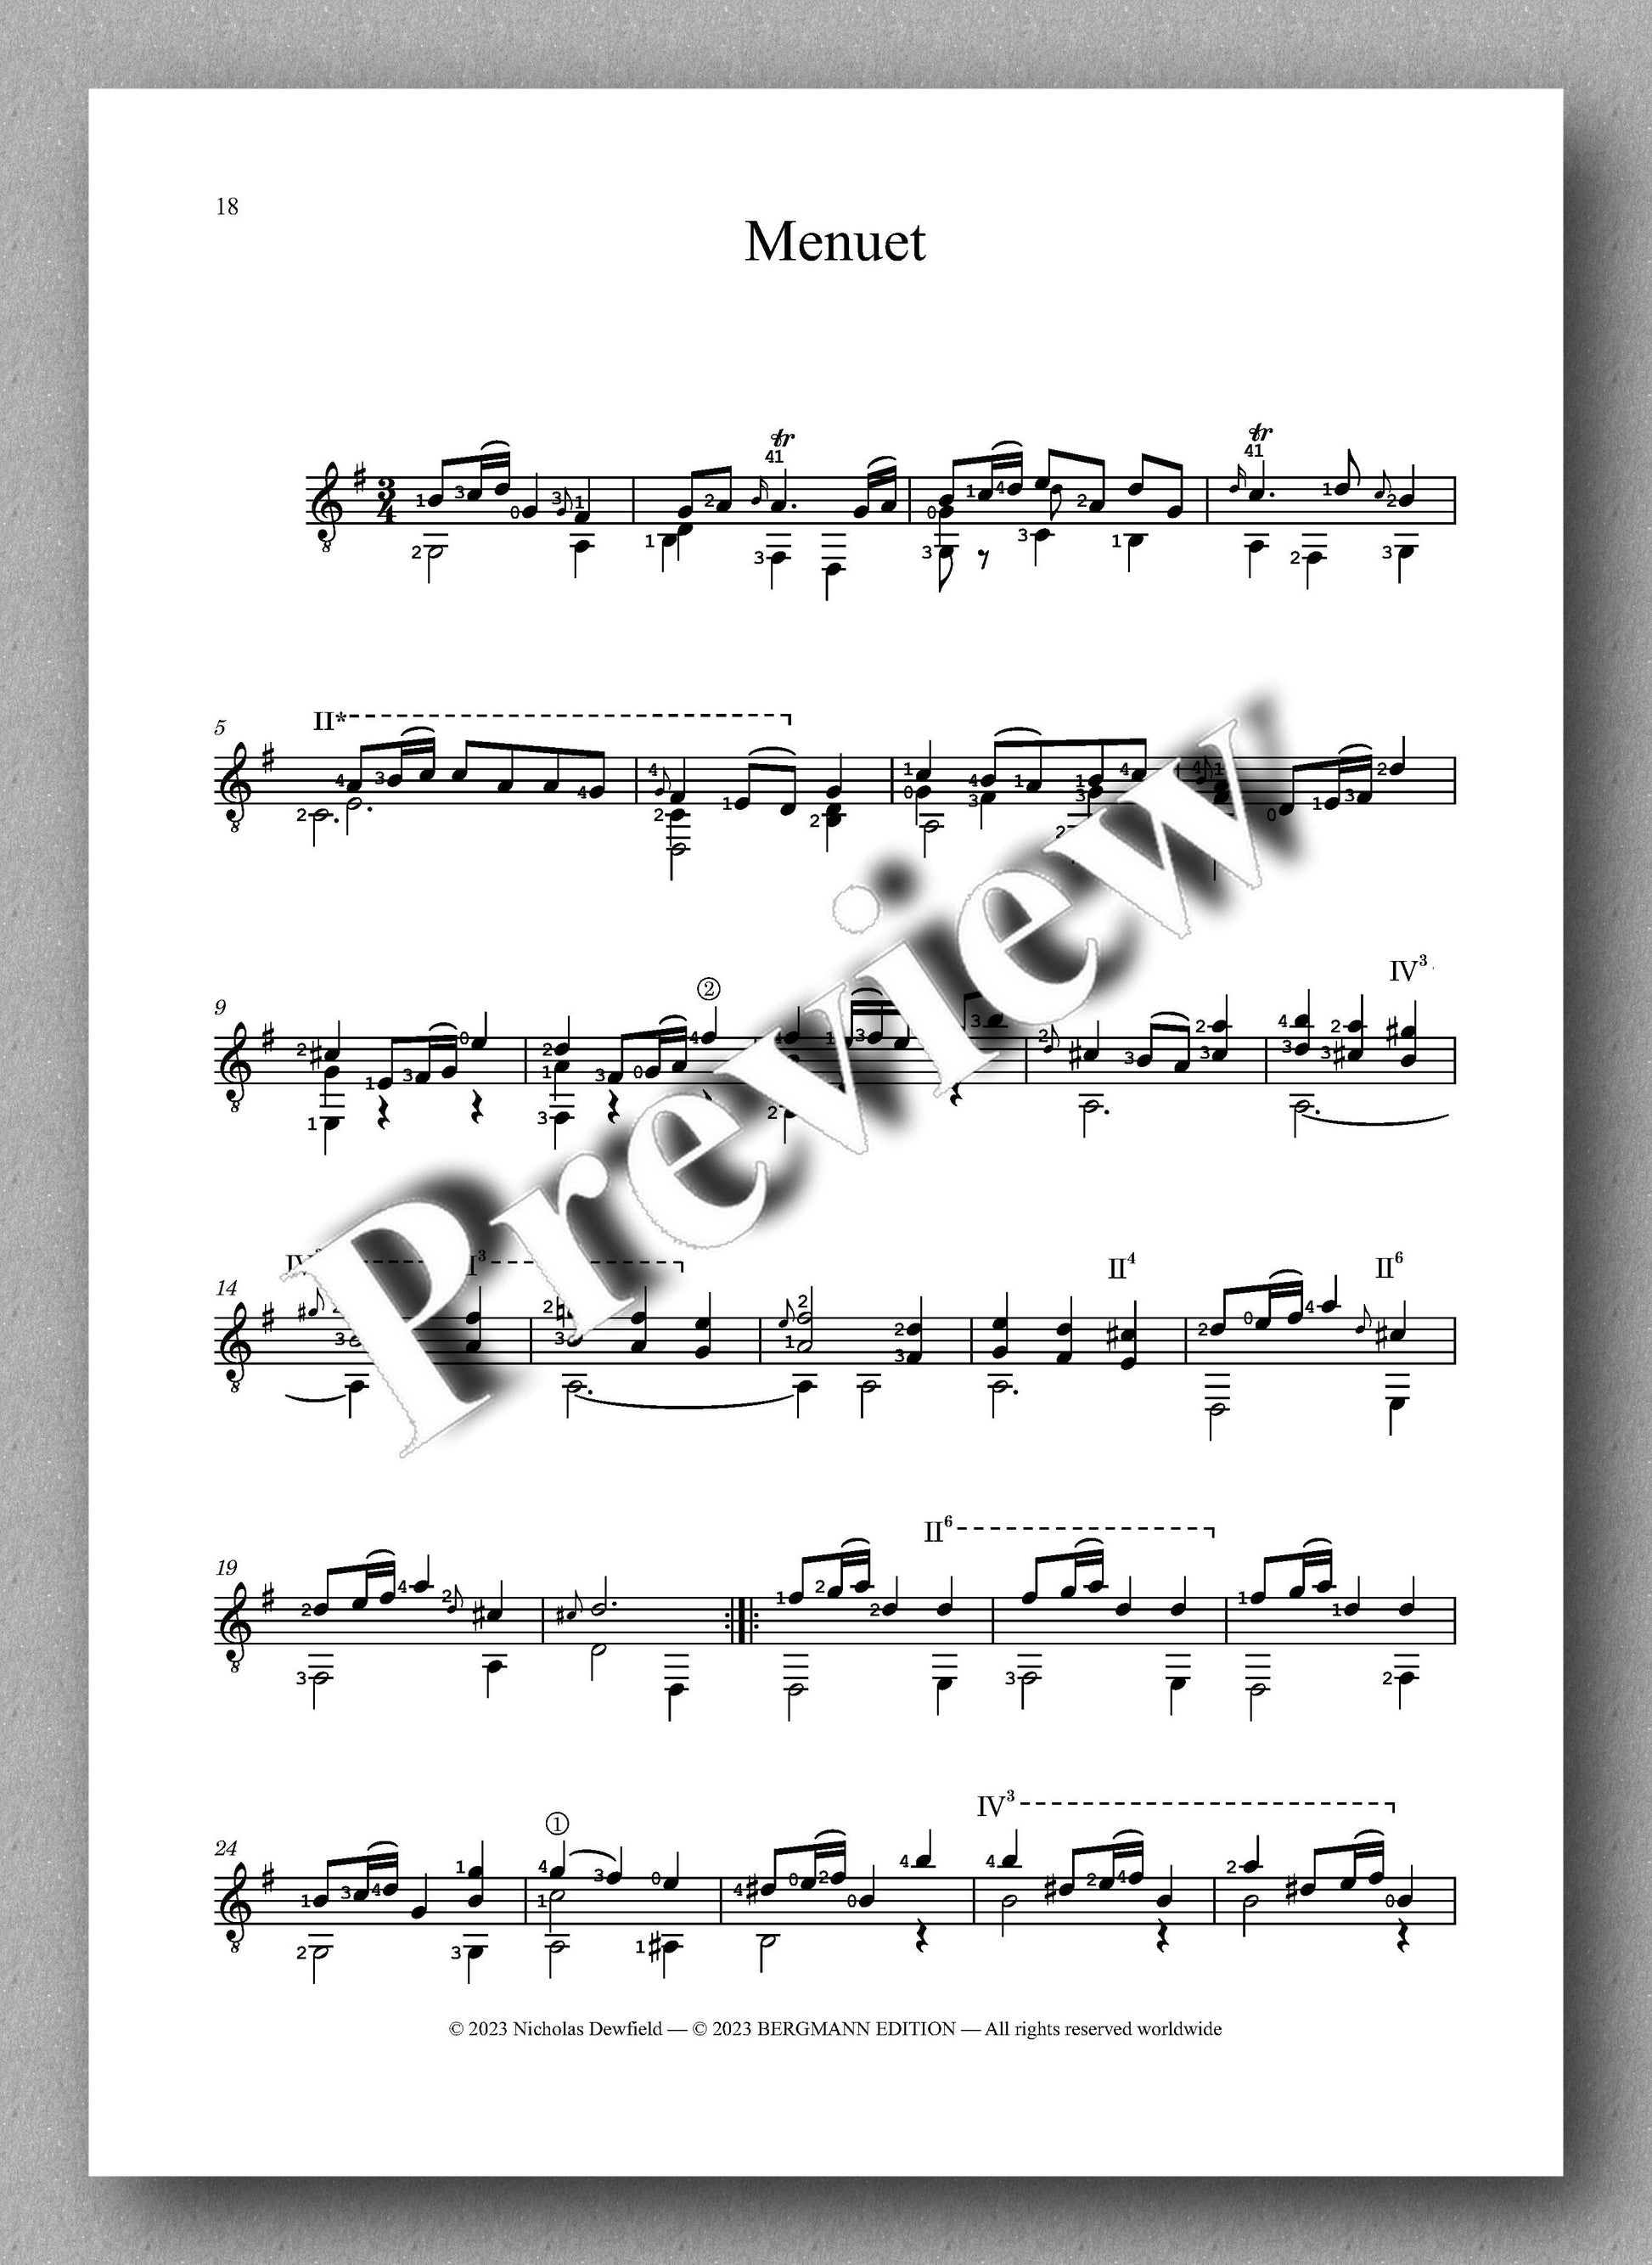 Sylvius Leopold Weiss (1687-1750), Sonata No. 22 - preview of the music score 6